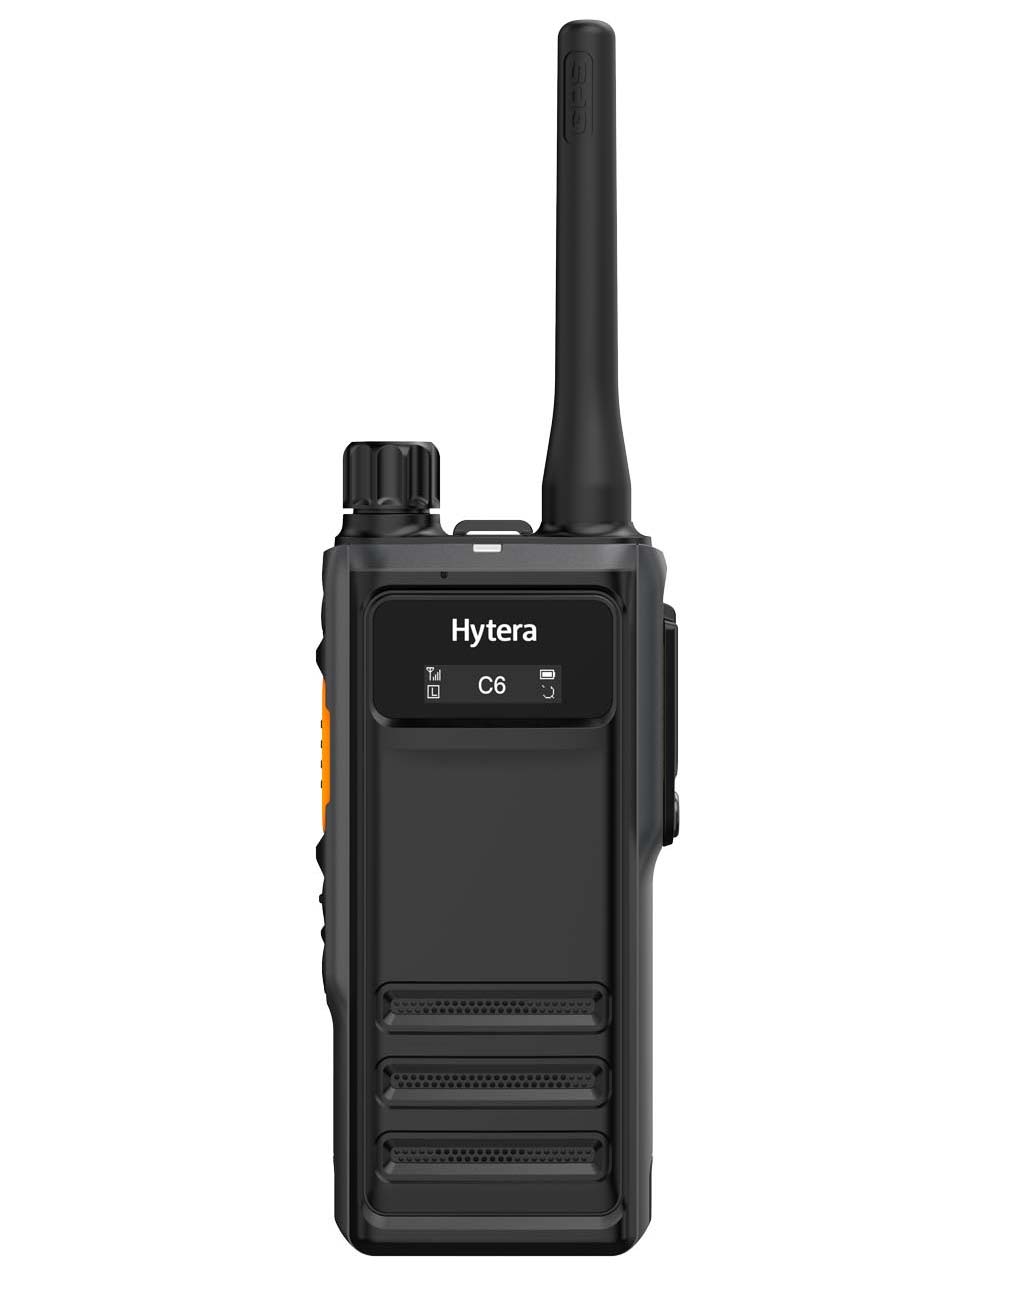 Hytera HP605 Two-Way Radio VHF 136-174MHz GPS Bluetooth P67 without accessories DMR & analogue HP605G BT V1